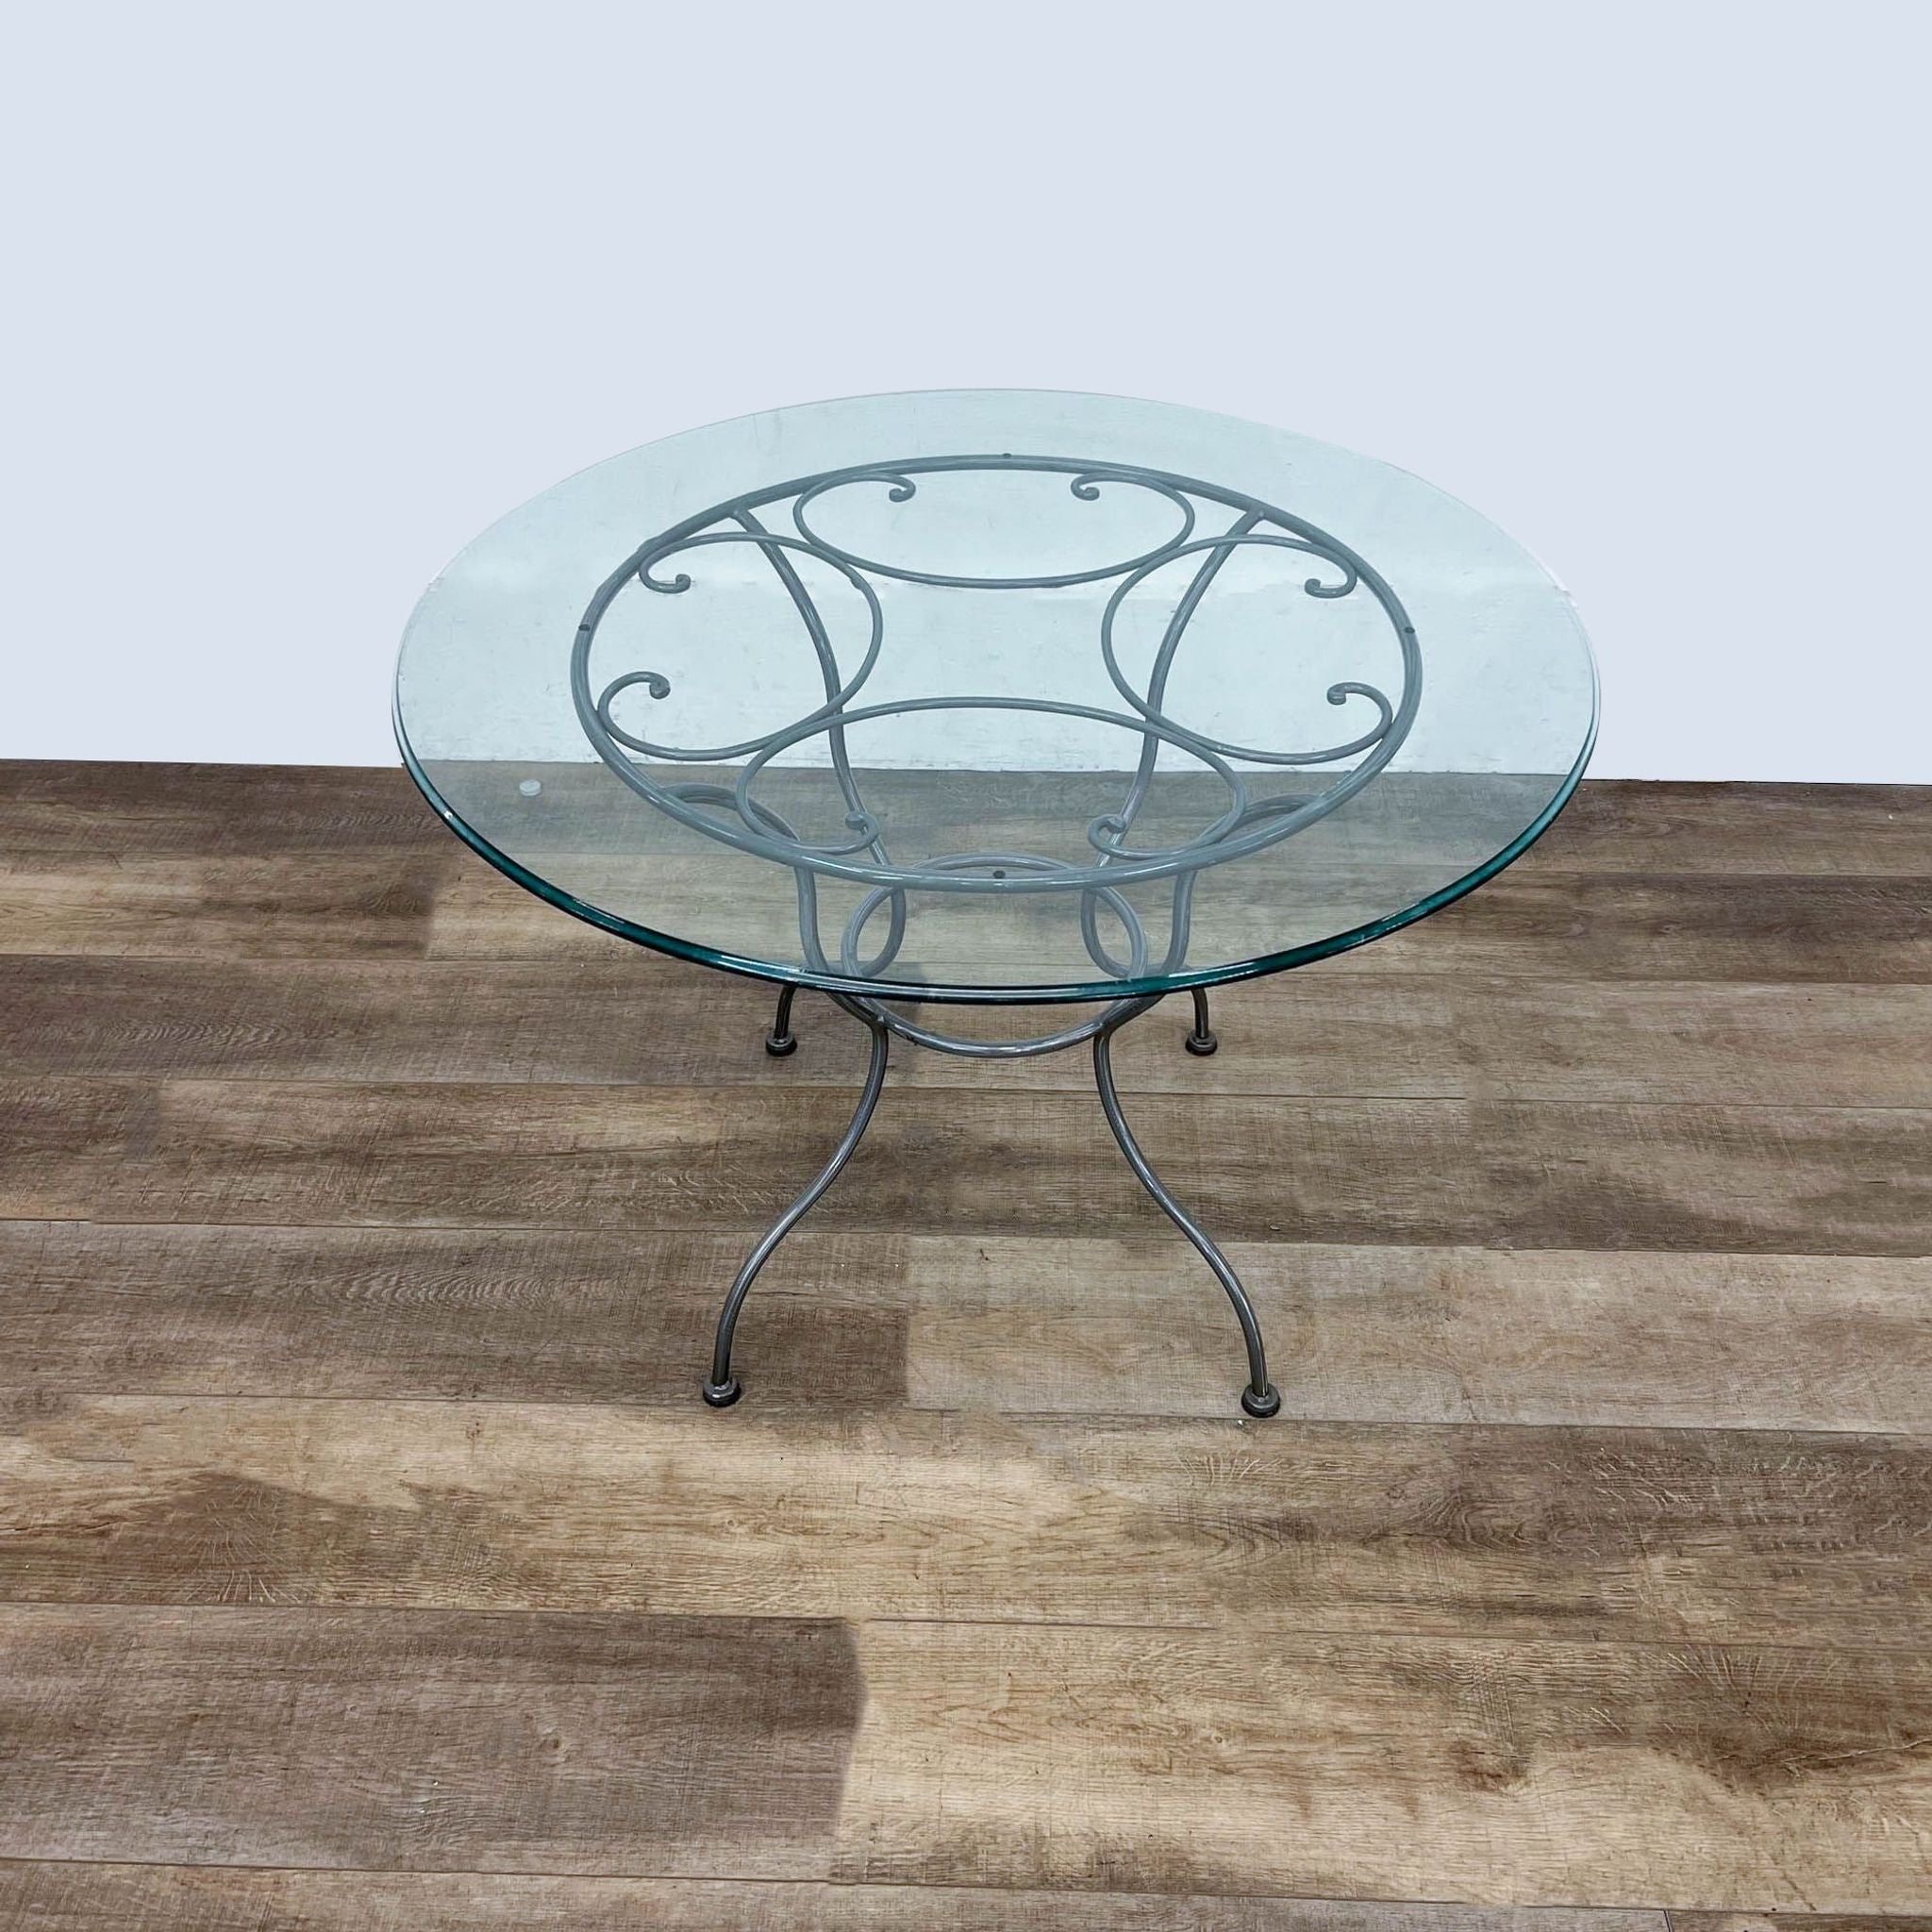 Reperch brand contemporary round dining table with a tempered glass top and powder-coated metal base, suitable for indoor/outdoor use.